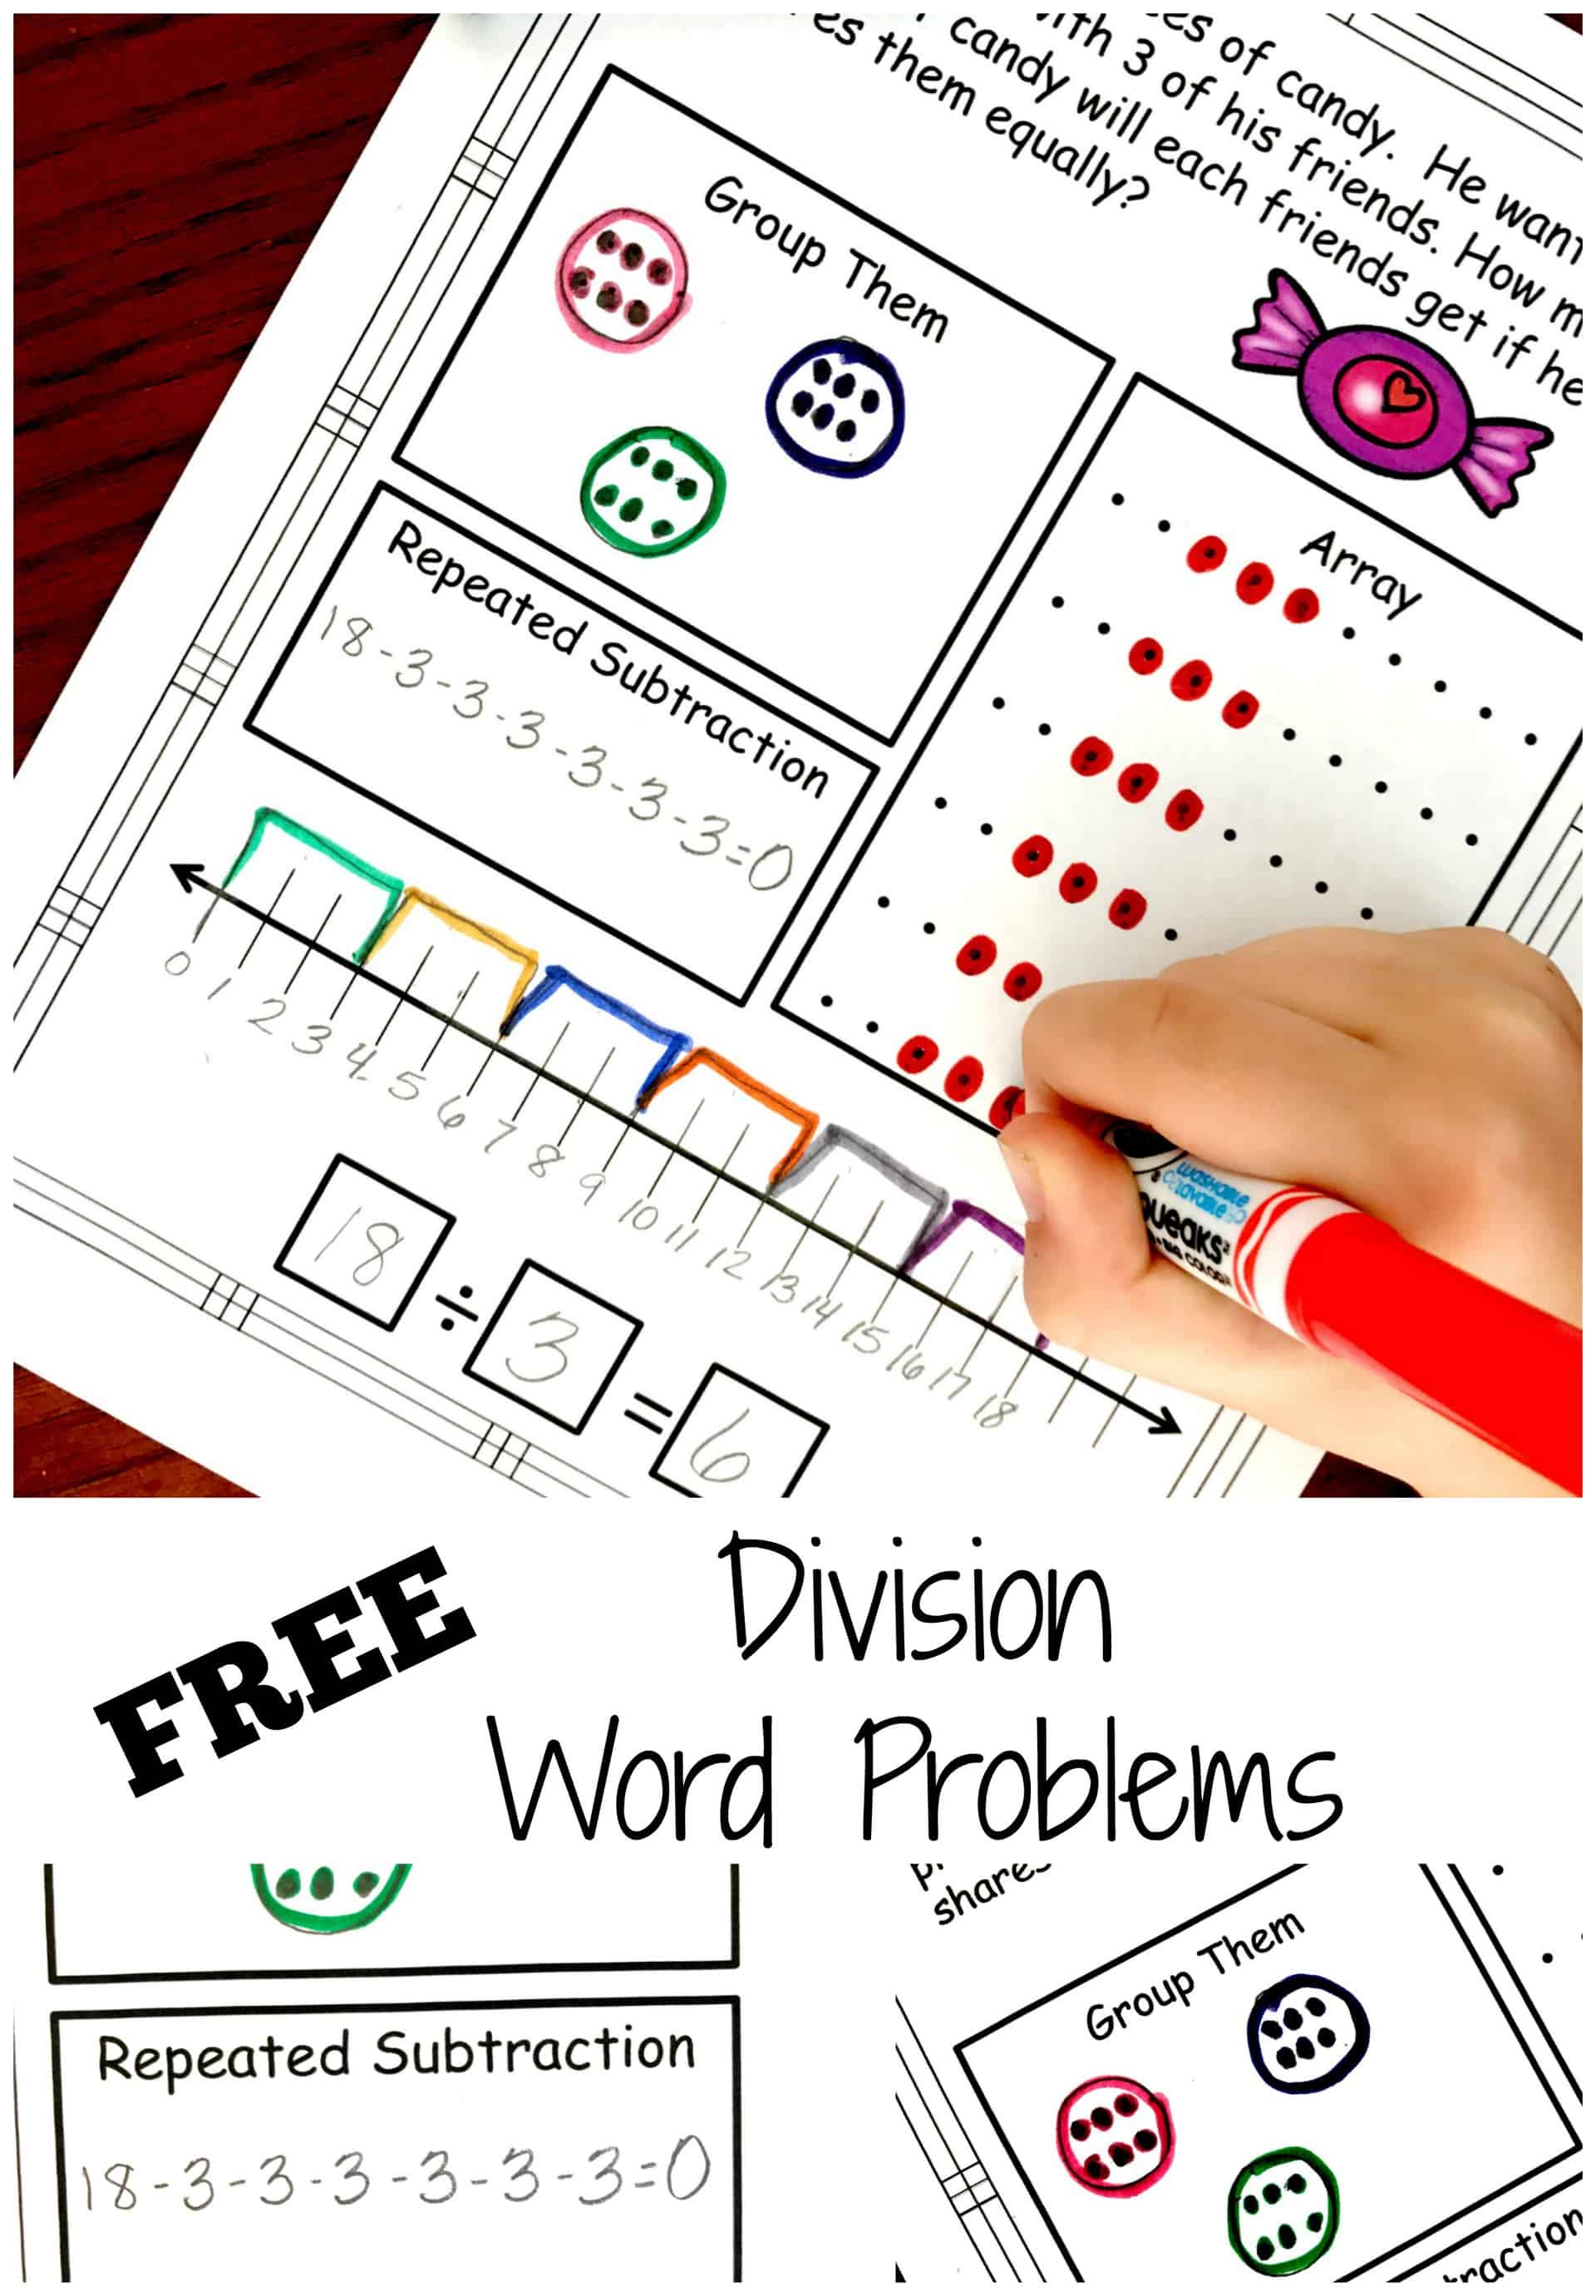 Division word problems worksheet with a child's hand coloring in an array. 